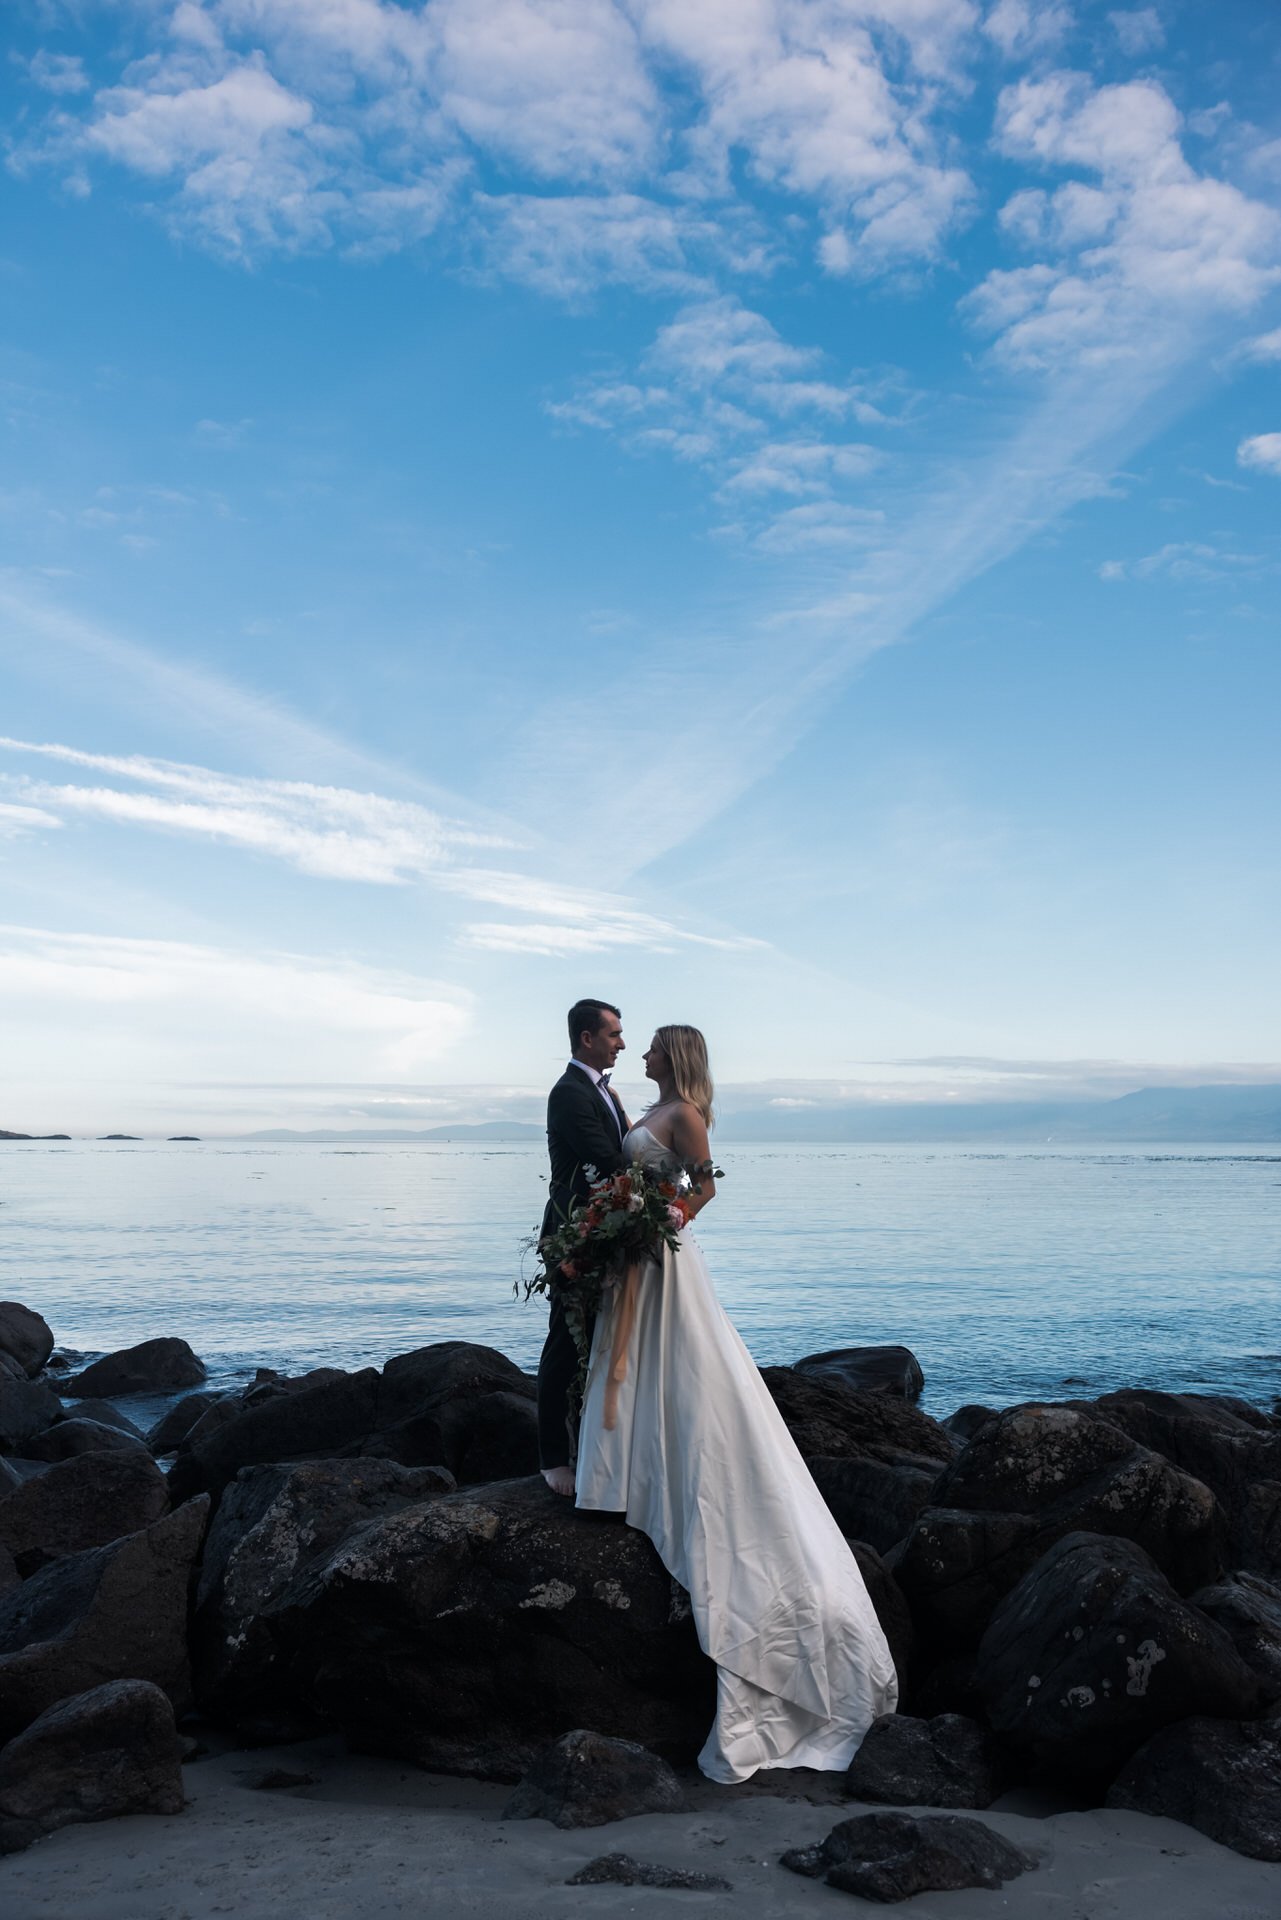 Vancouver Island Adventure Elopement and Small Wedding Photographer - Allie Knull's Photography-72.jpg